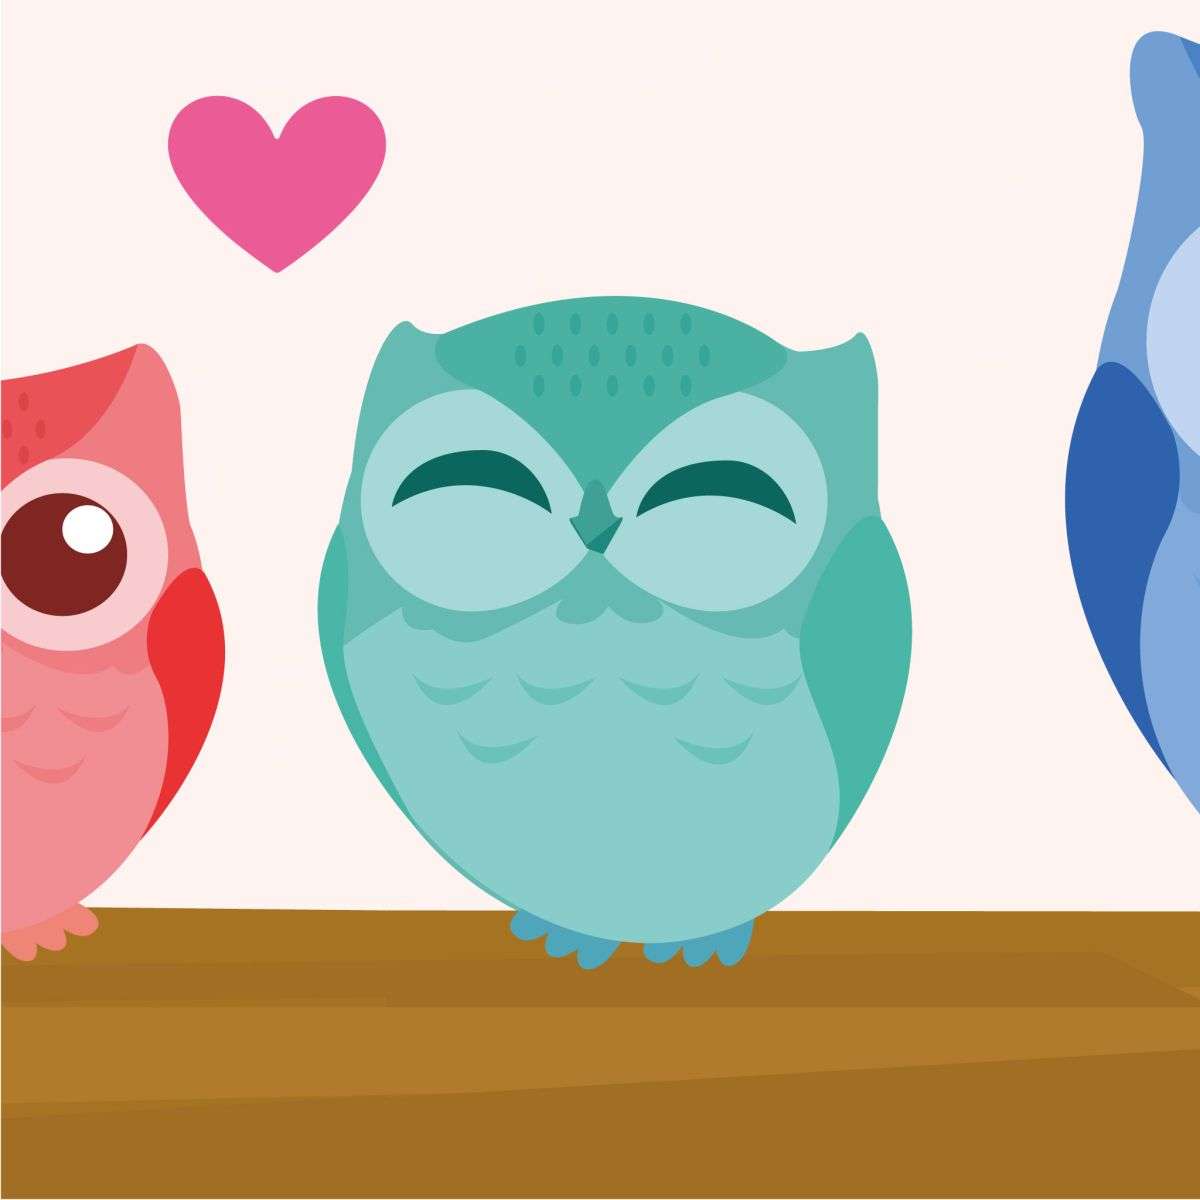 Owl Family Wall Stickers